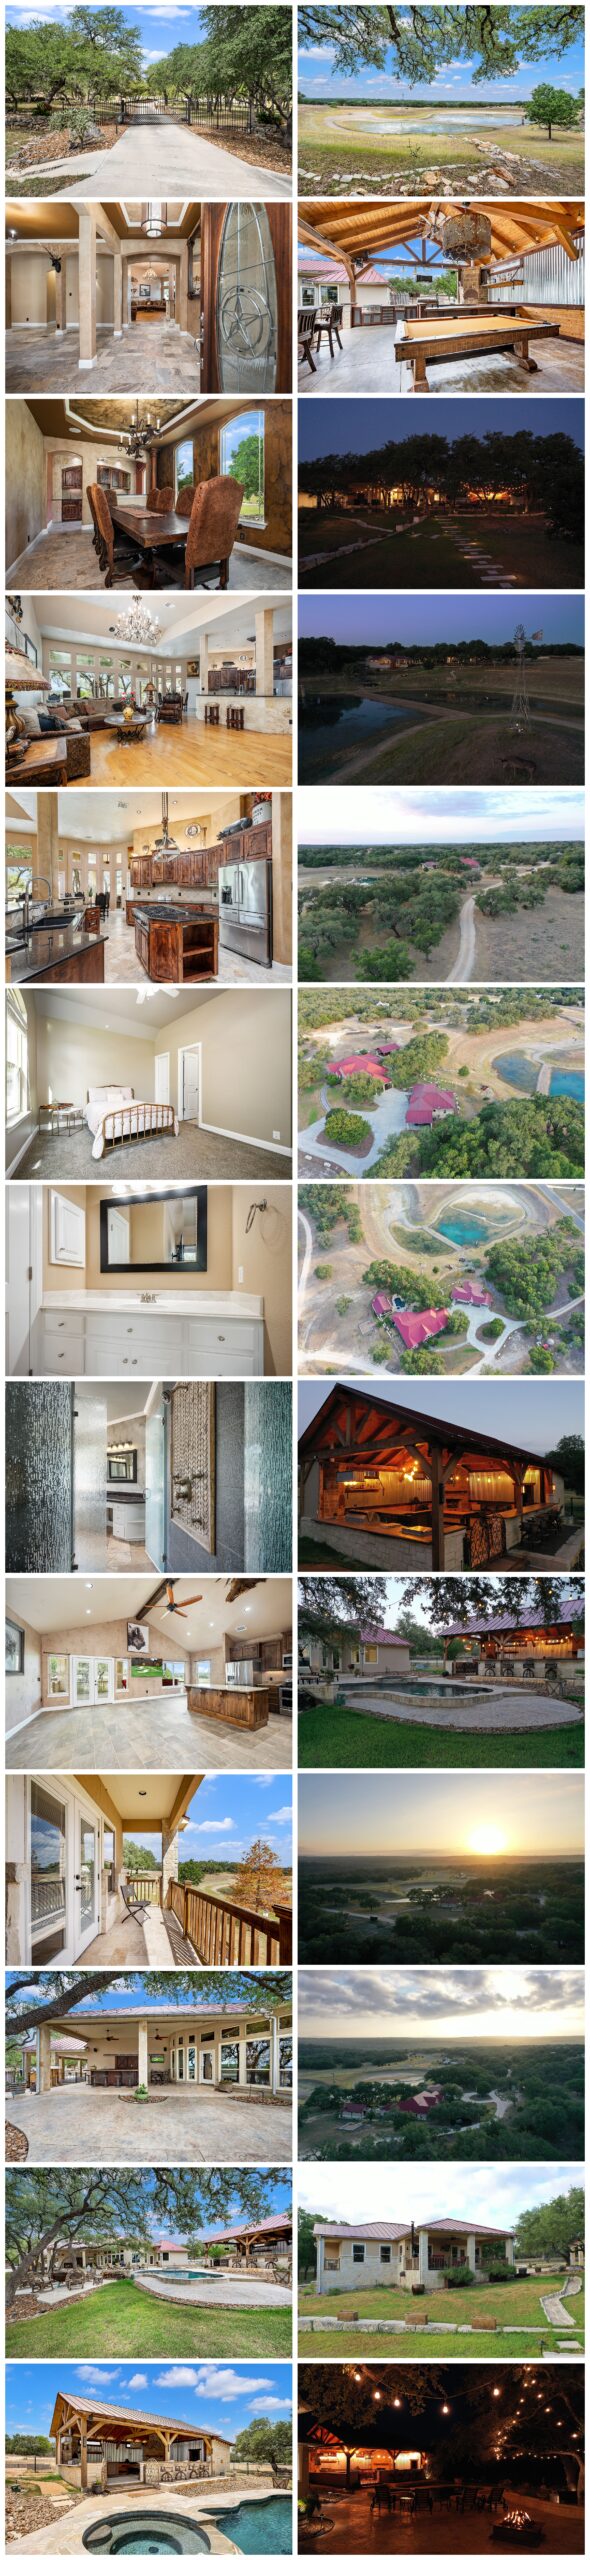 Texas Hill Country Estate, The Gahm Real Estate Team